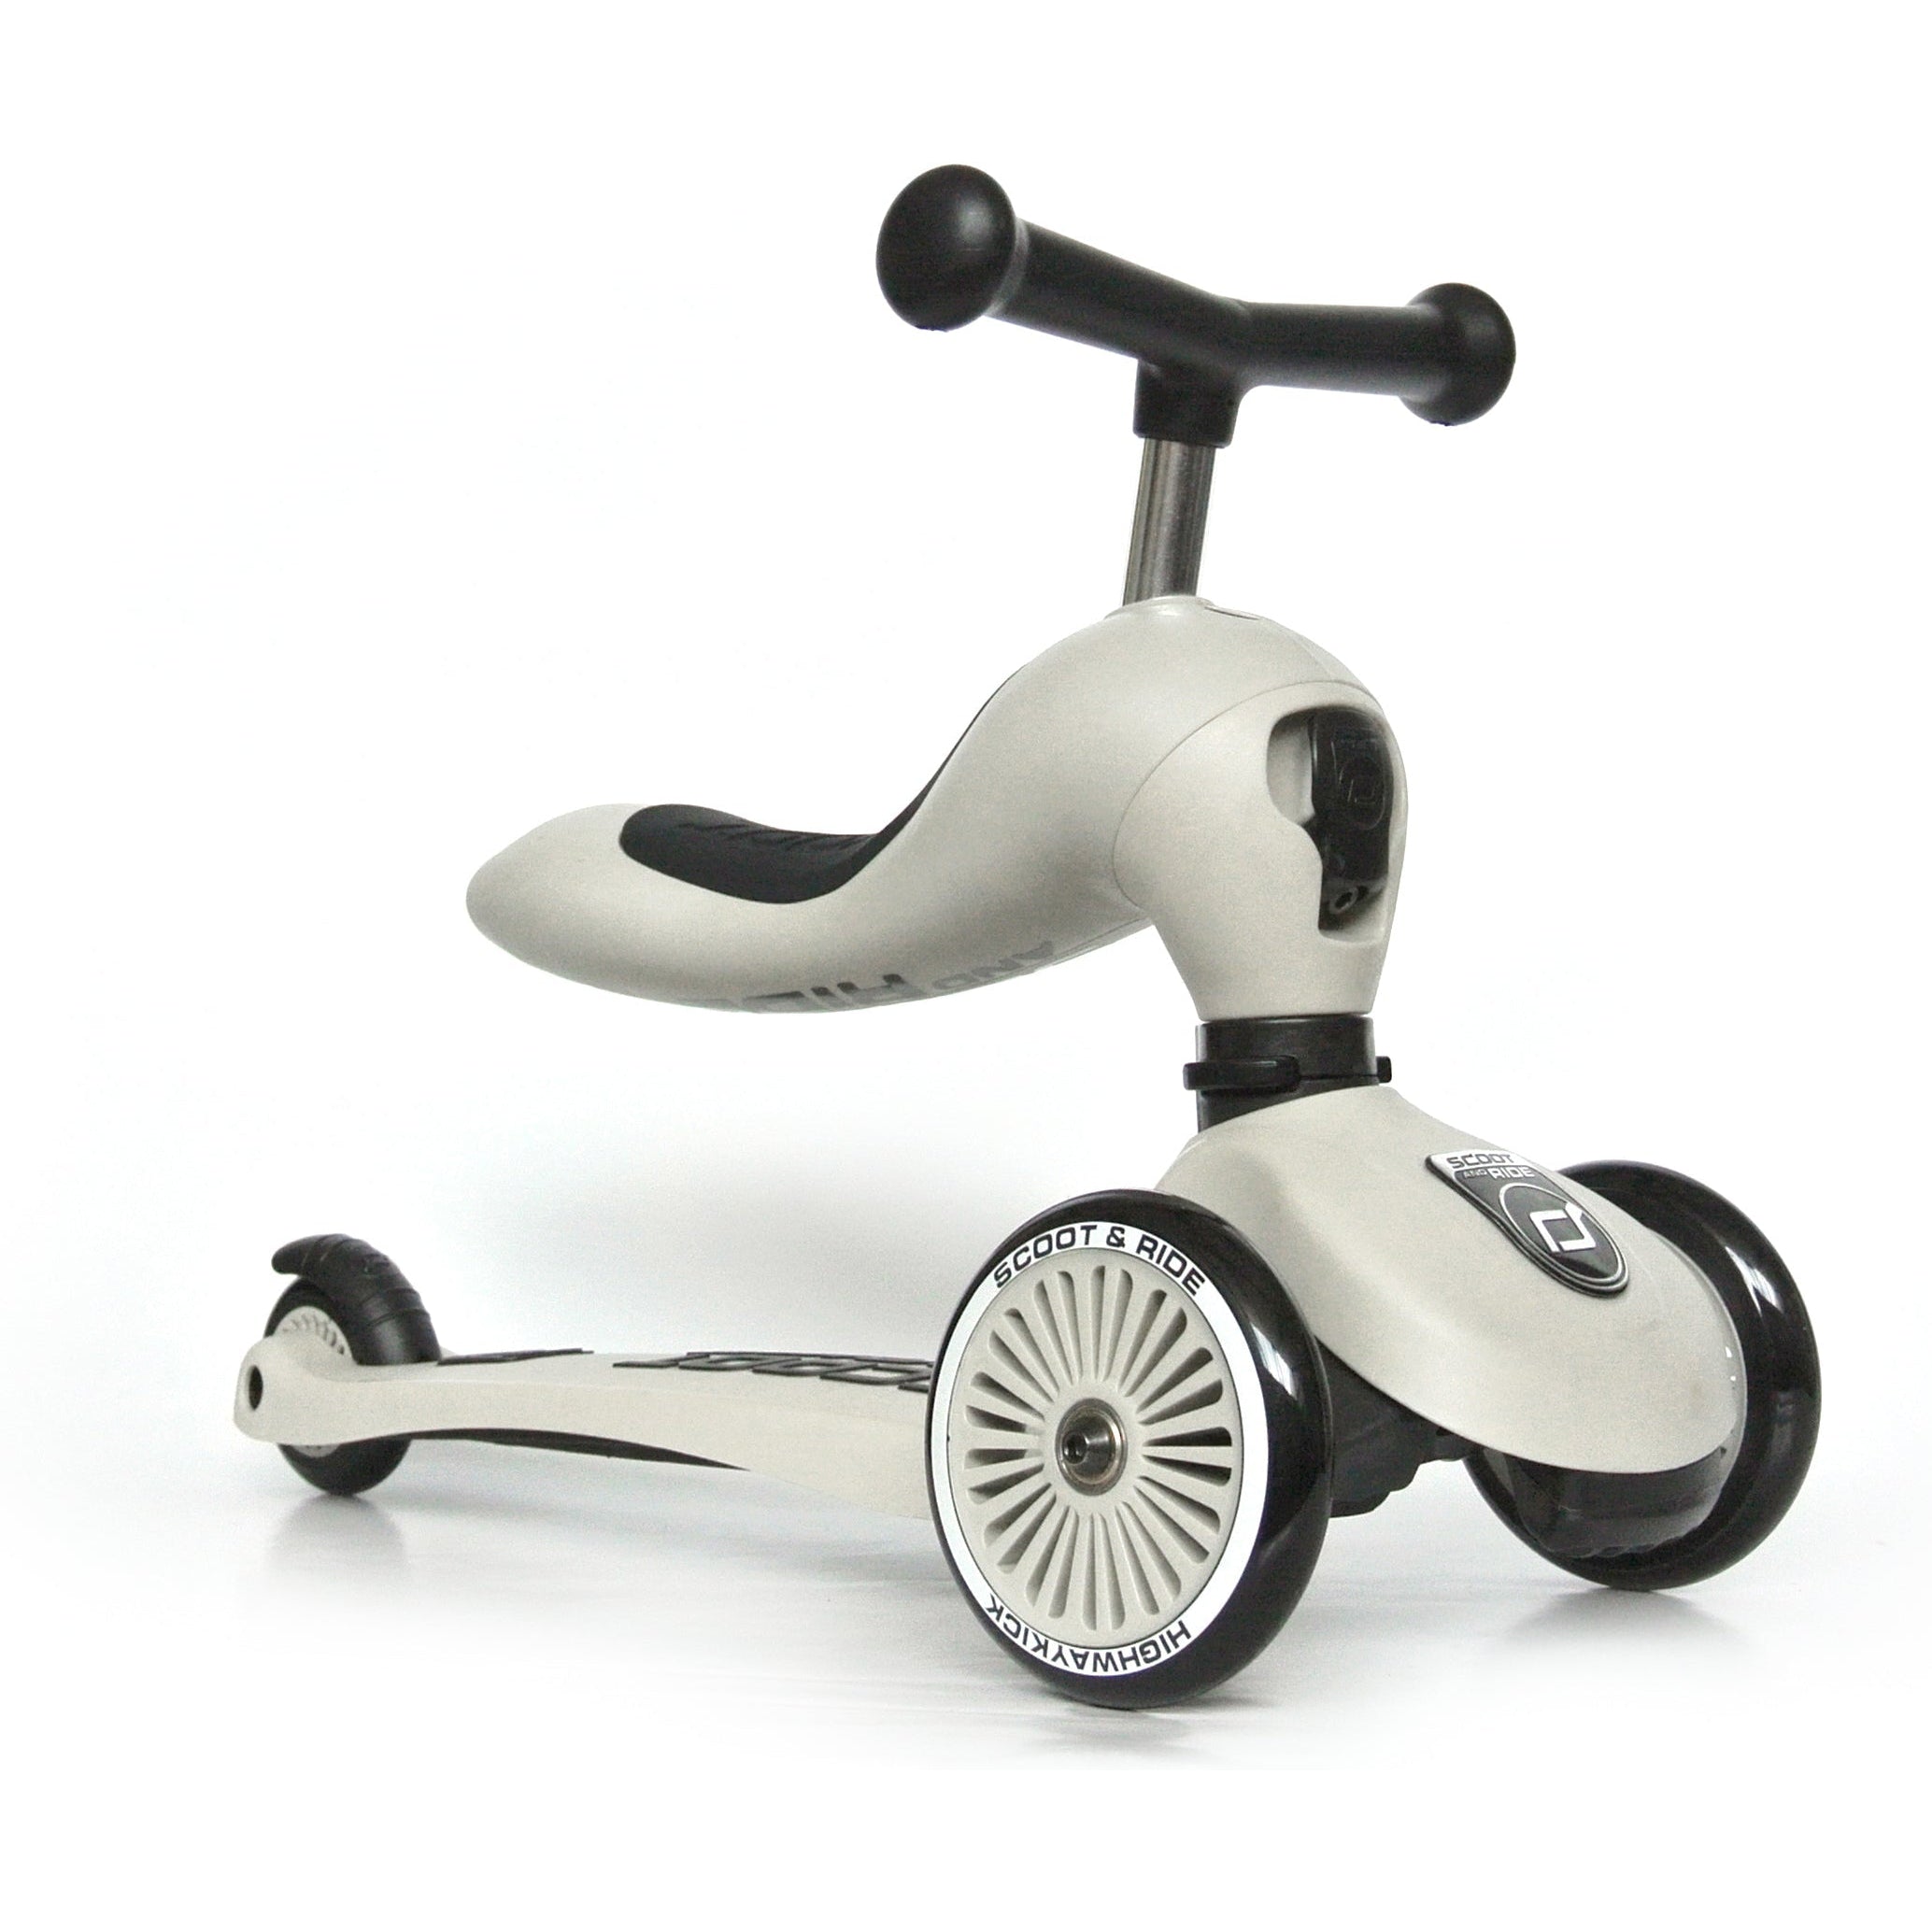 Scoot and Ride Highway Kick 1 - 3 Wheel Seated or Standing Scooter for Toddlers Scooters